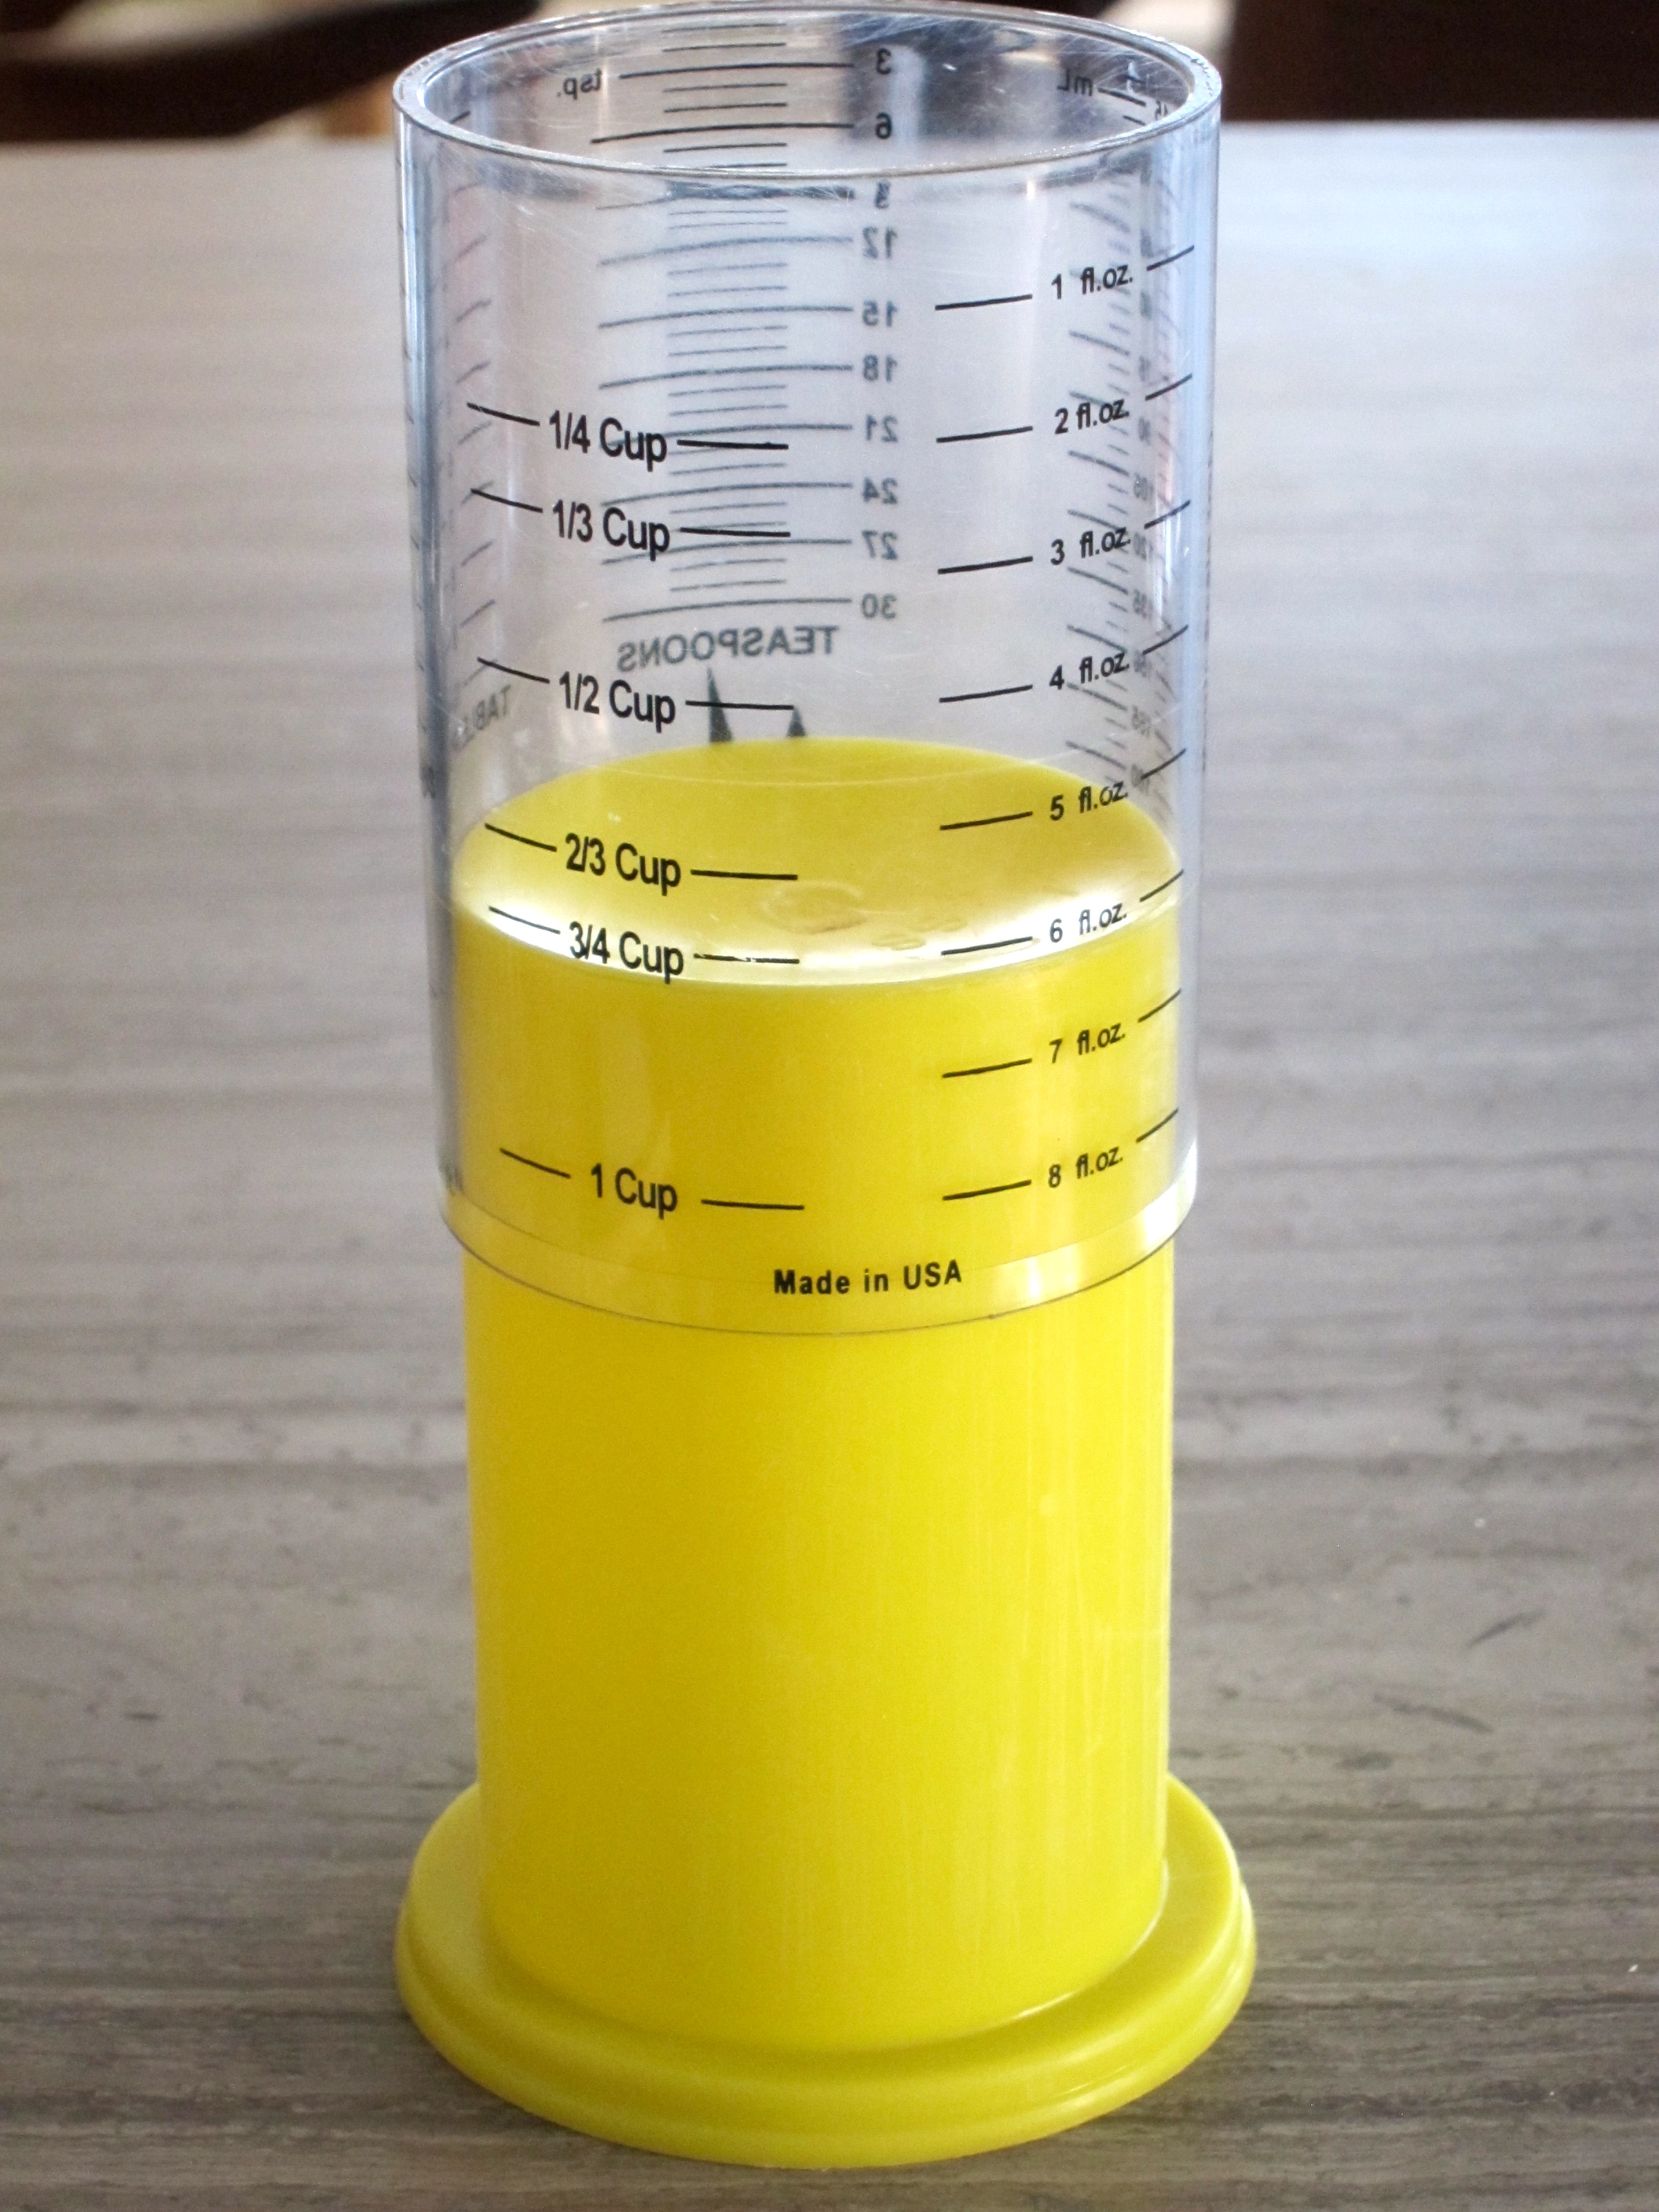 Milmour Products Metric Wonder Cup Measuring Cup Wet/Dry Measure Yellow USA